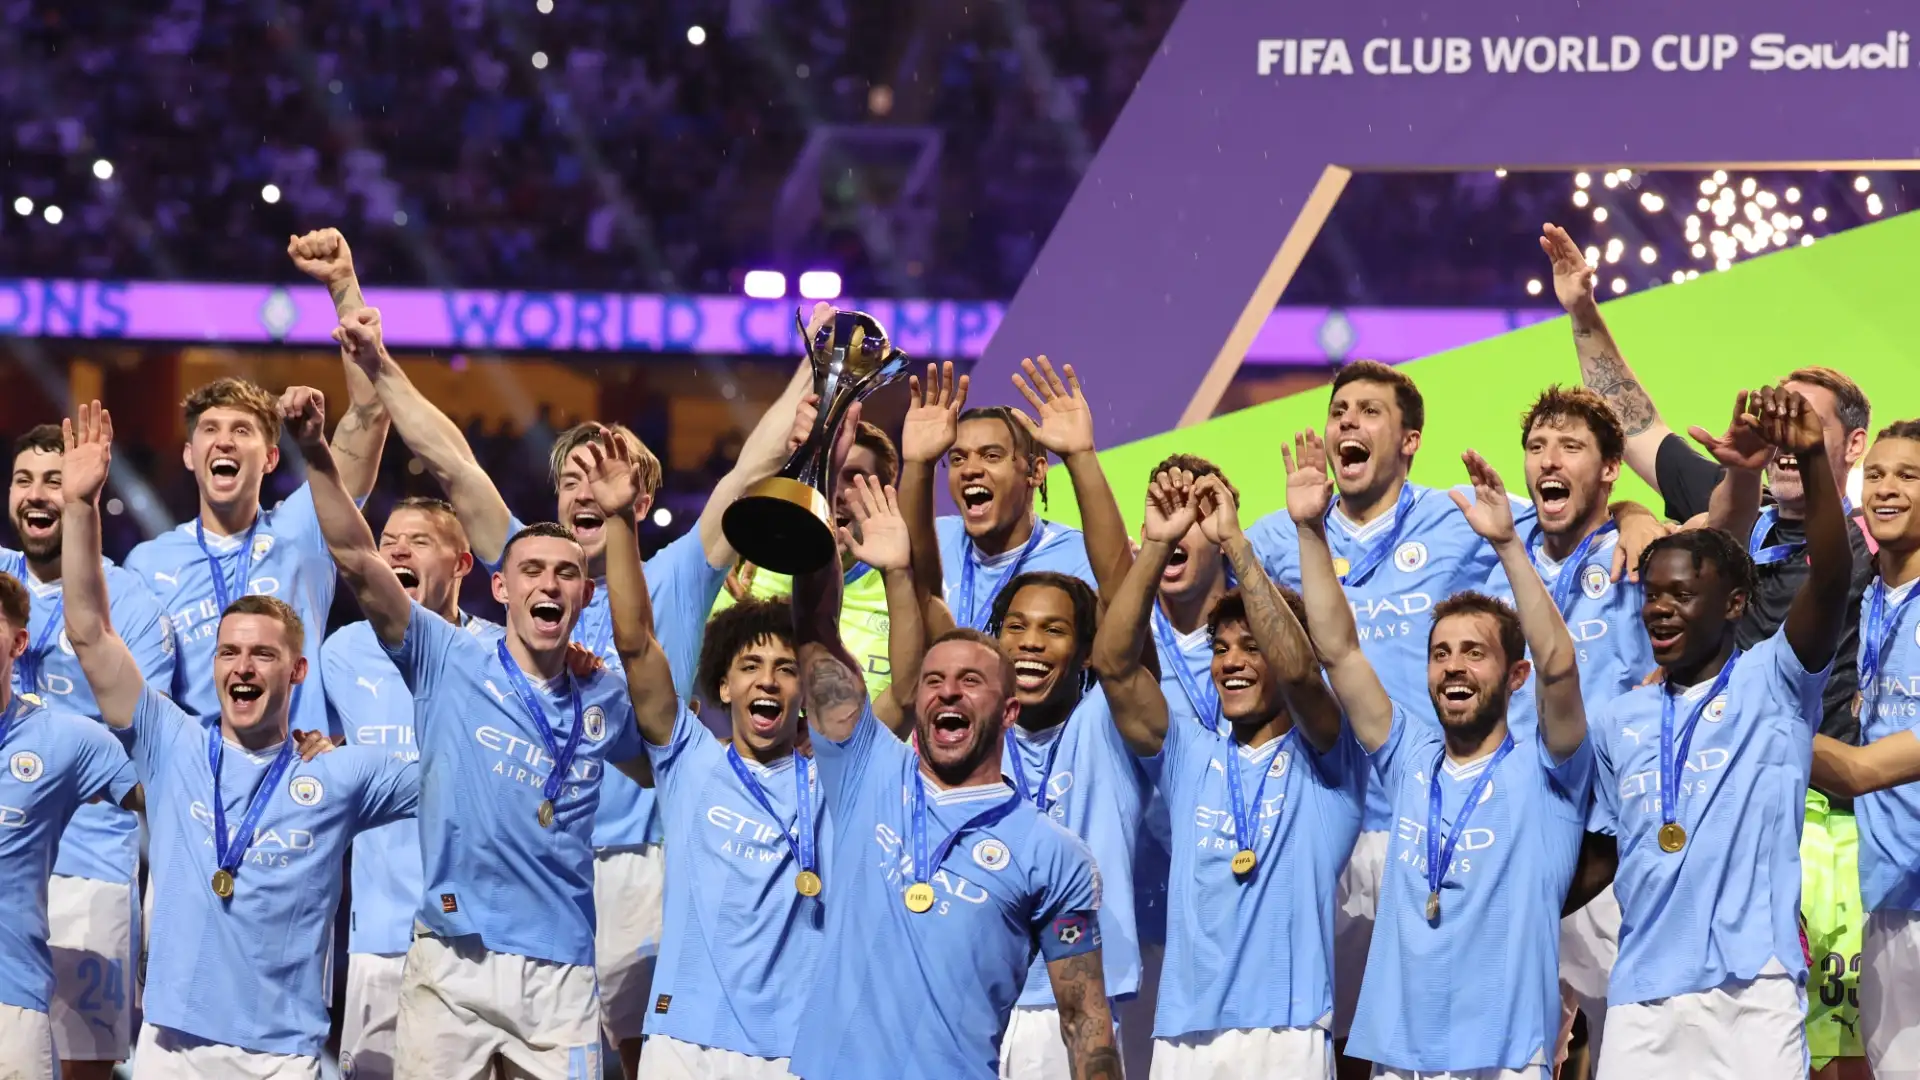 Explained: Why Premier League and La Liga clubs could boycott expanded Club World Cup in 2025